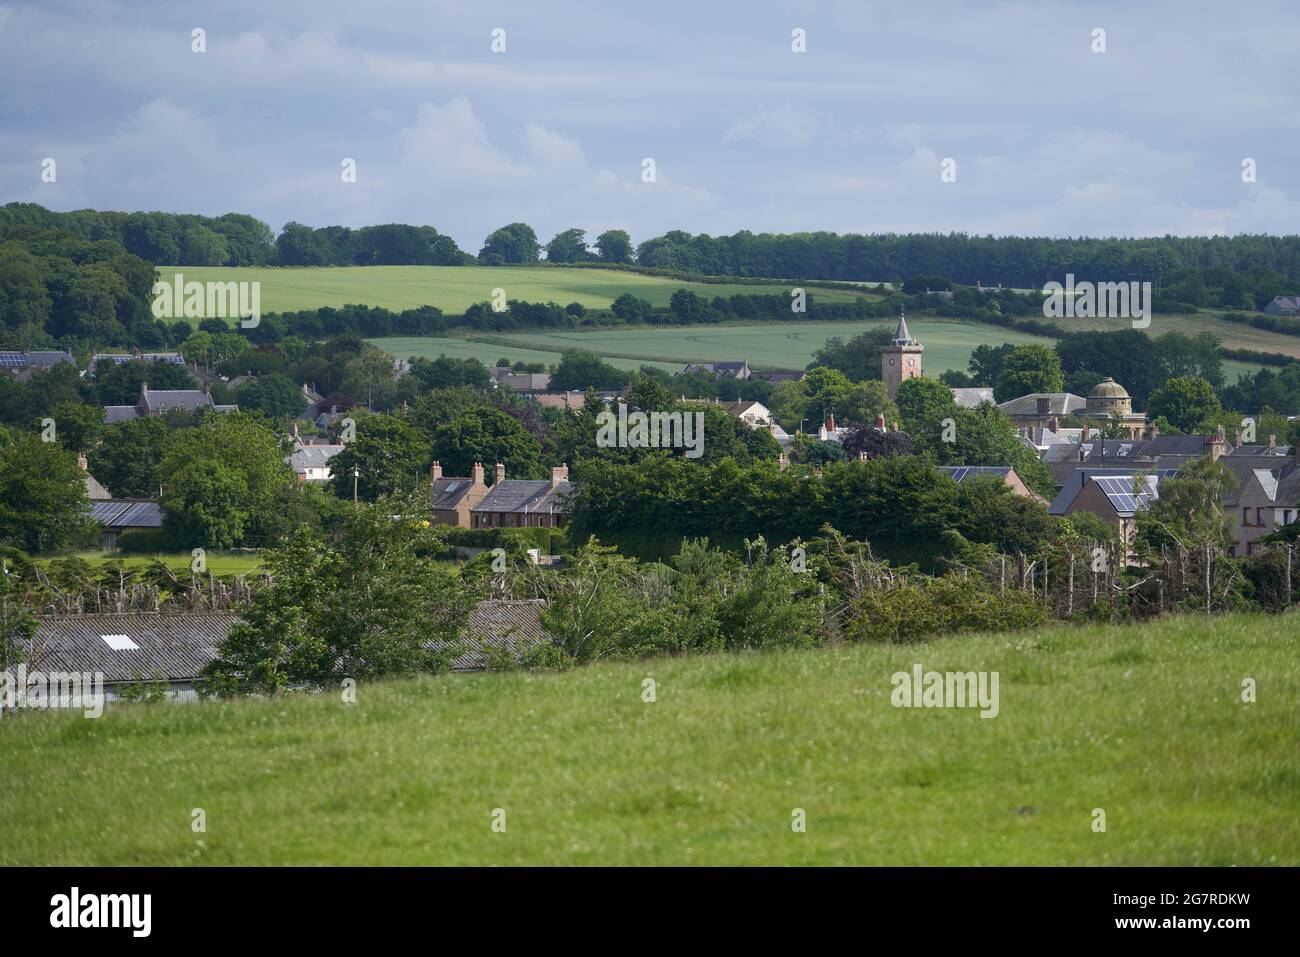 View across fields of the town of Greenlaw in the Scottish Borders.The Town Hall a prominent landmark. Stock Photo